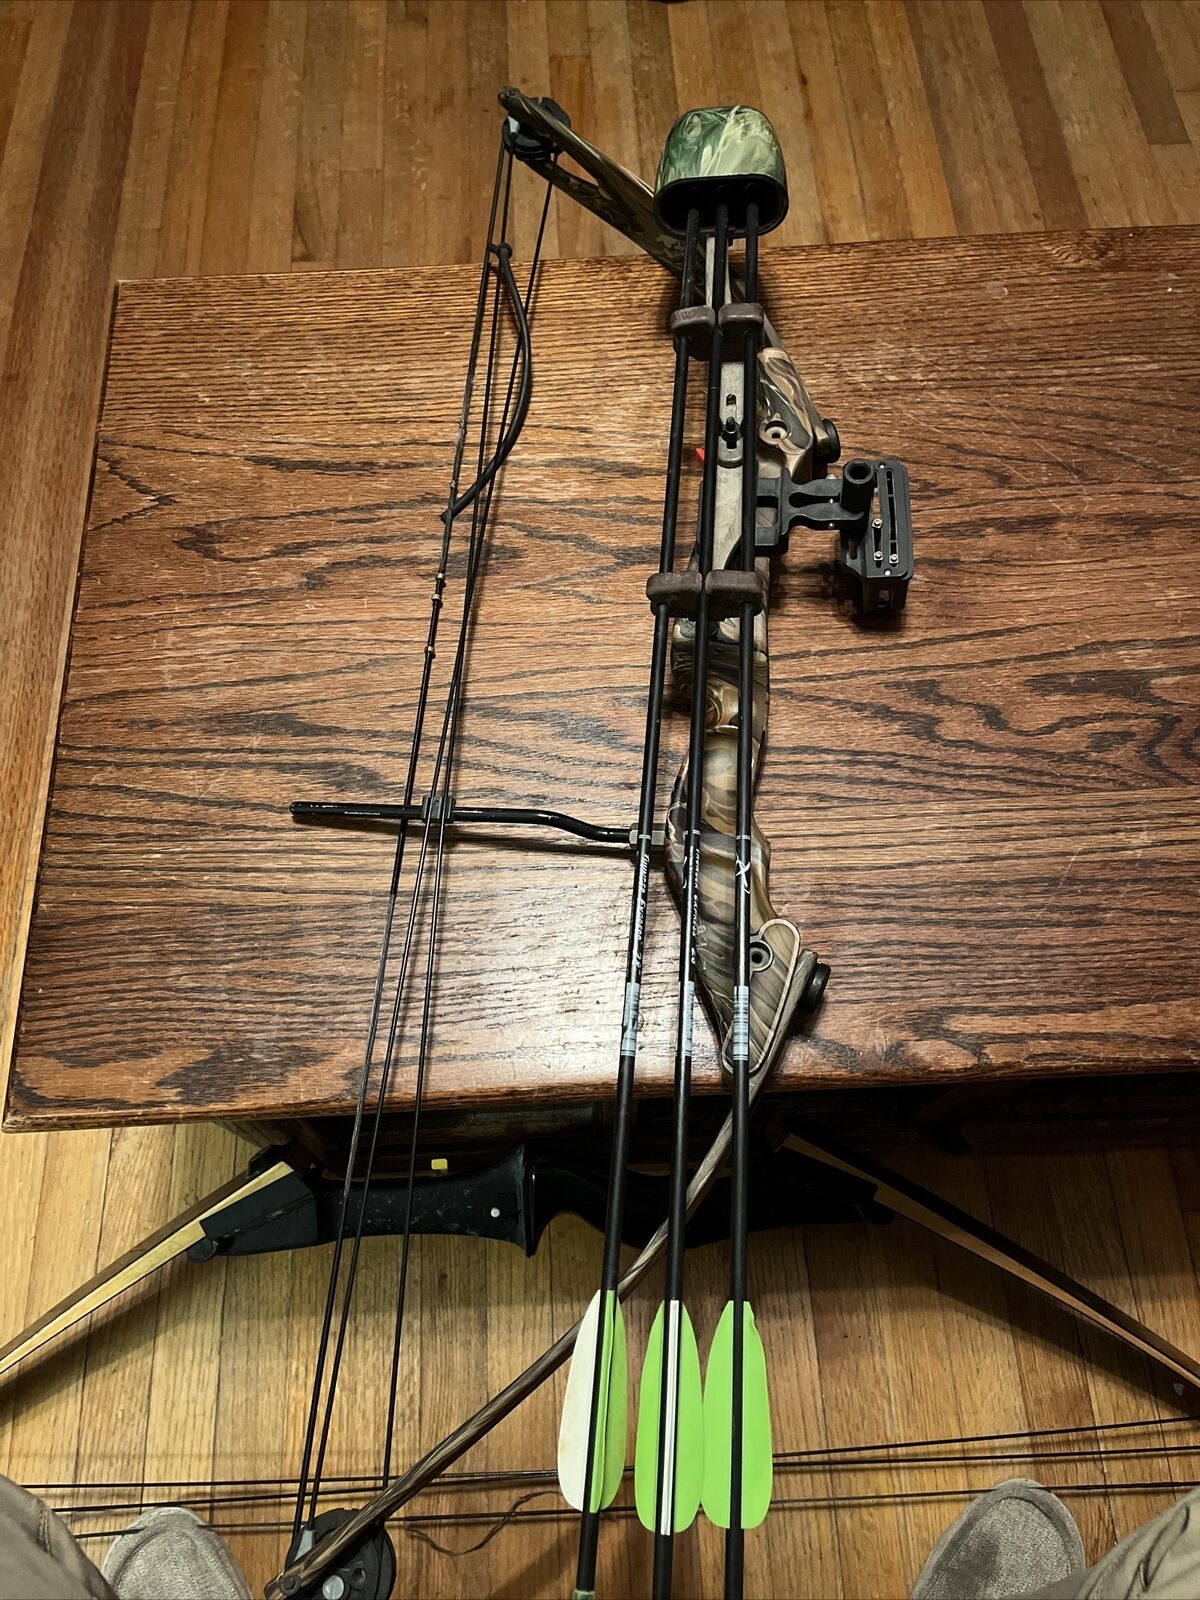 Bear Ultra Lite Compound Bow  Includes extras, see pictures 25"-45lbs